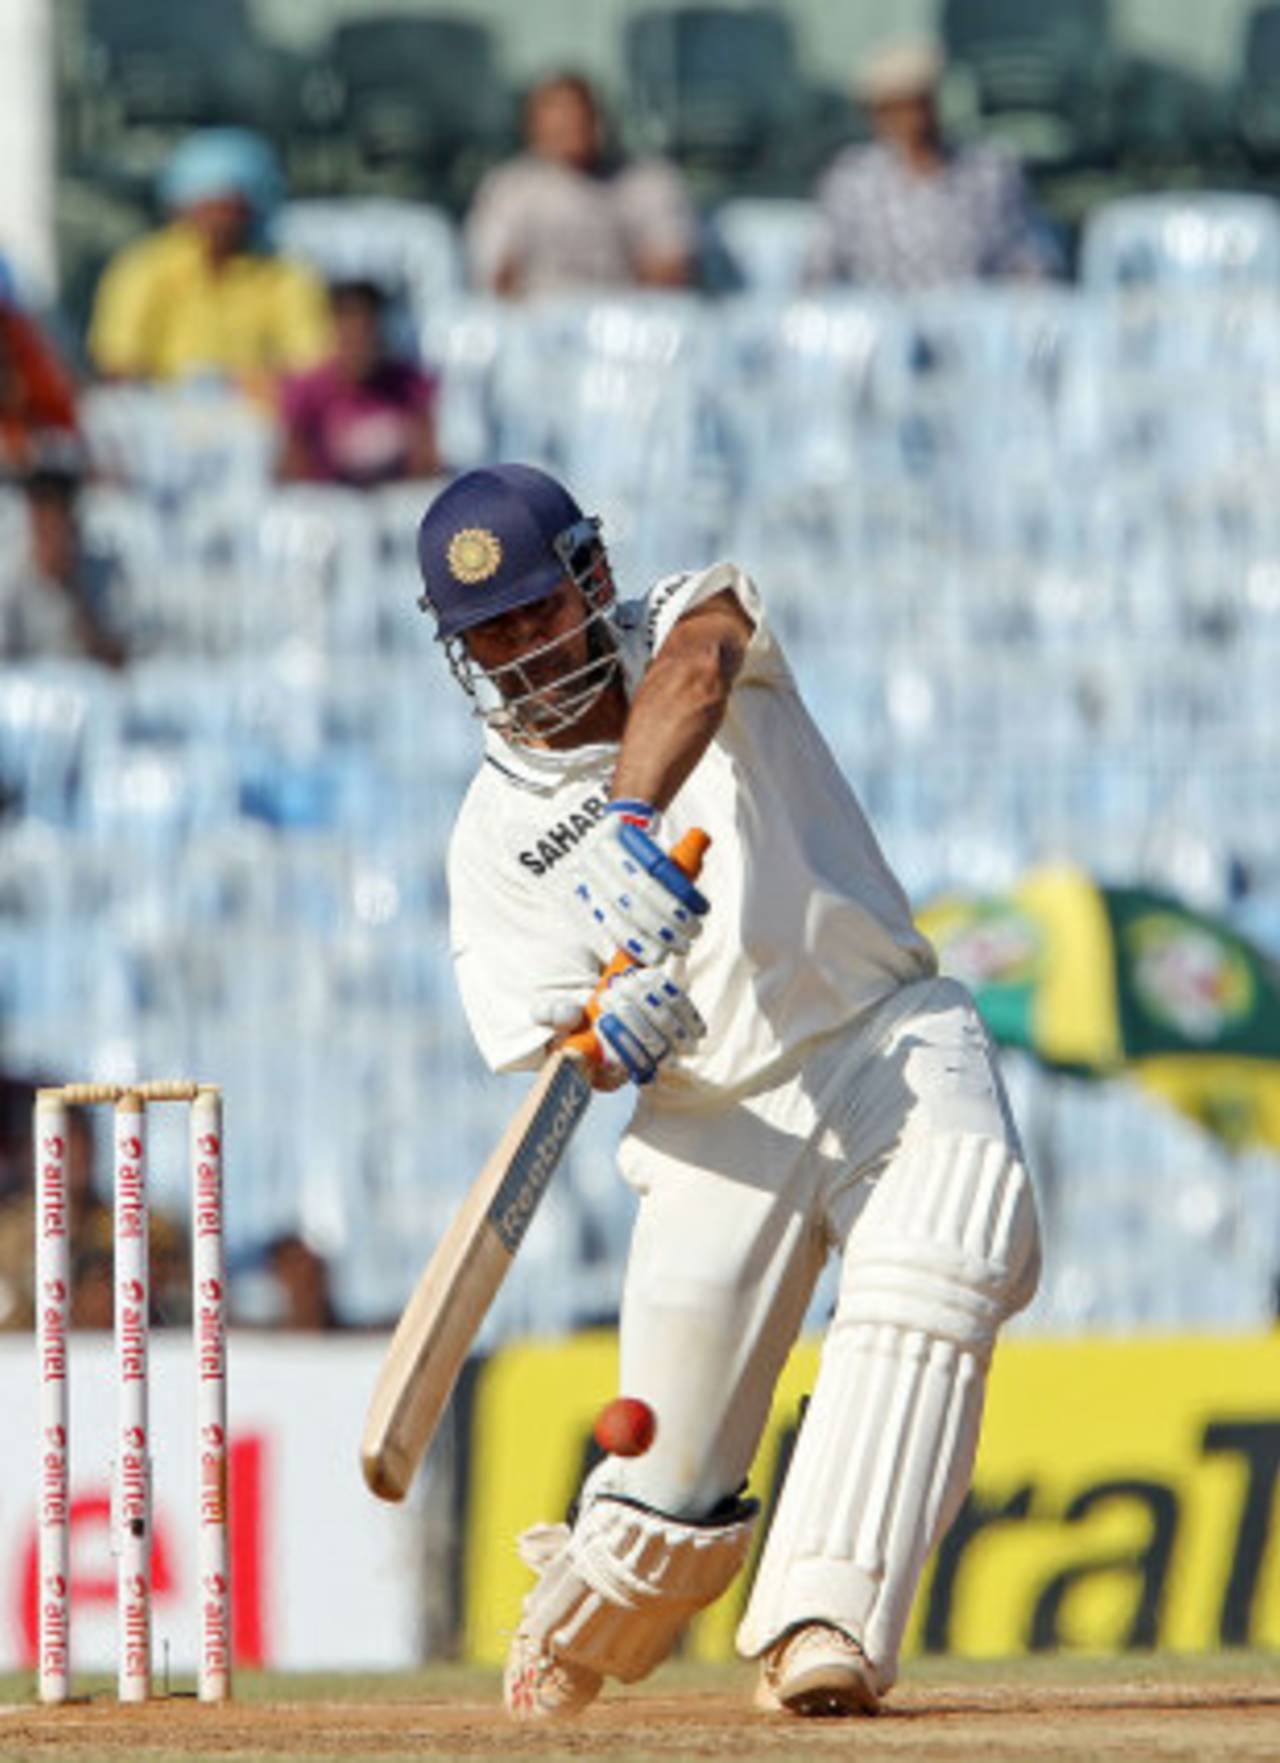 MS Dhoni launches one for six, India v Australia, 1st Test, Chennai, 3rd day, February 24, 2013